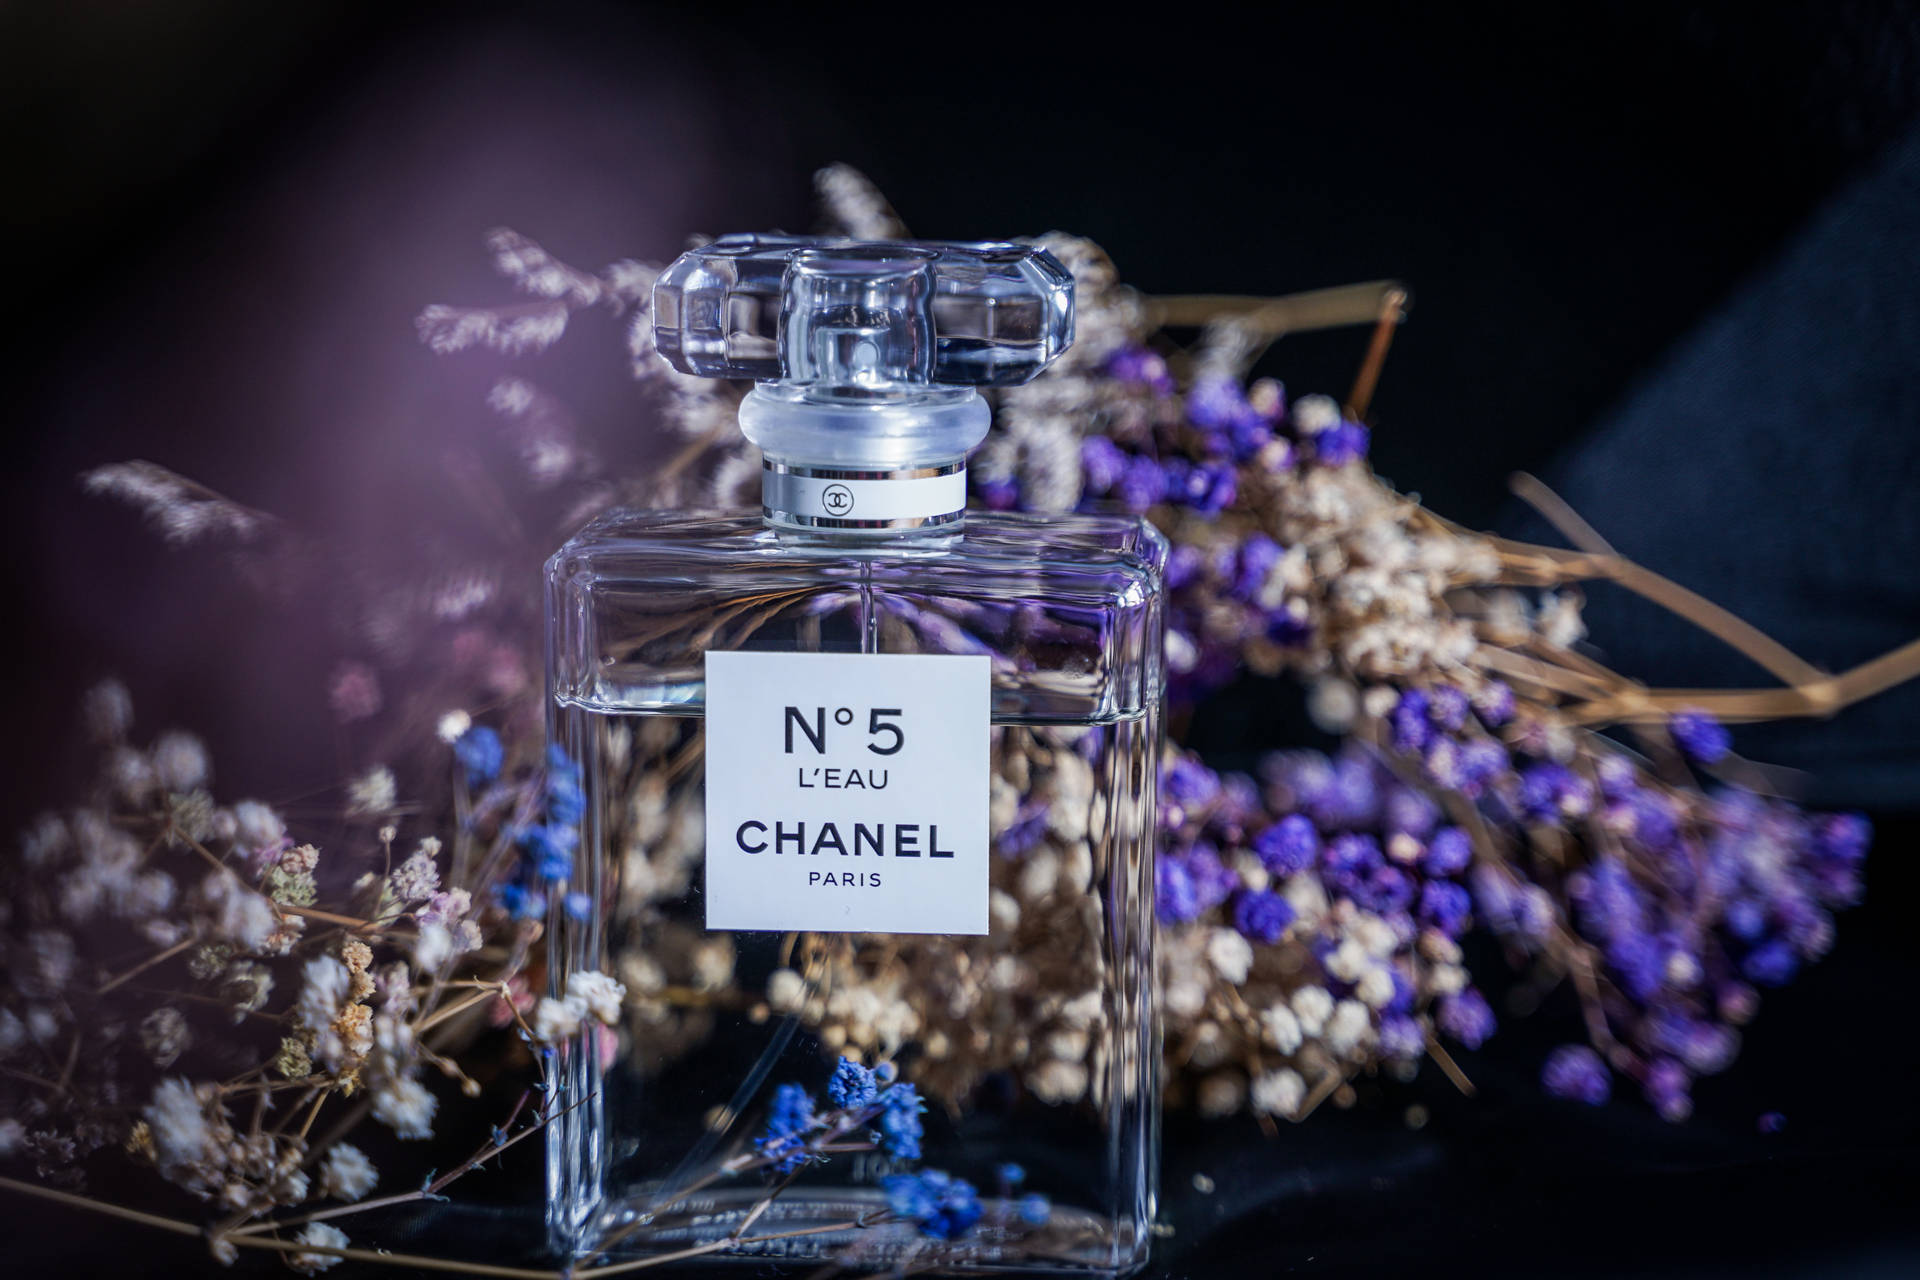 Download Chanel No. 5 L'eau With Flowers Wallpaper